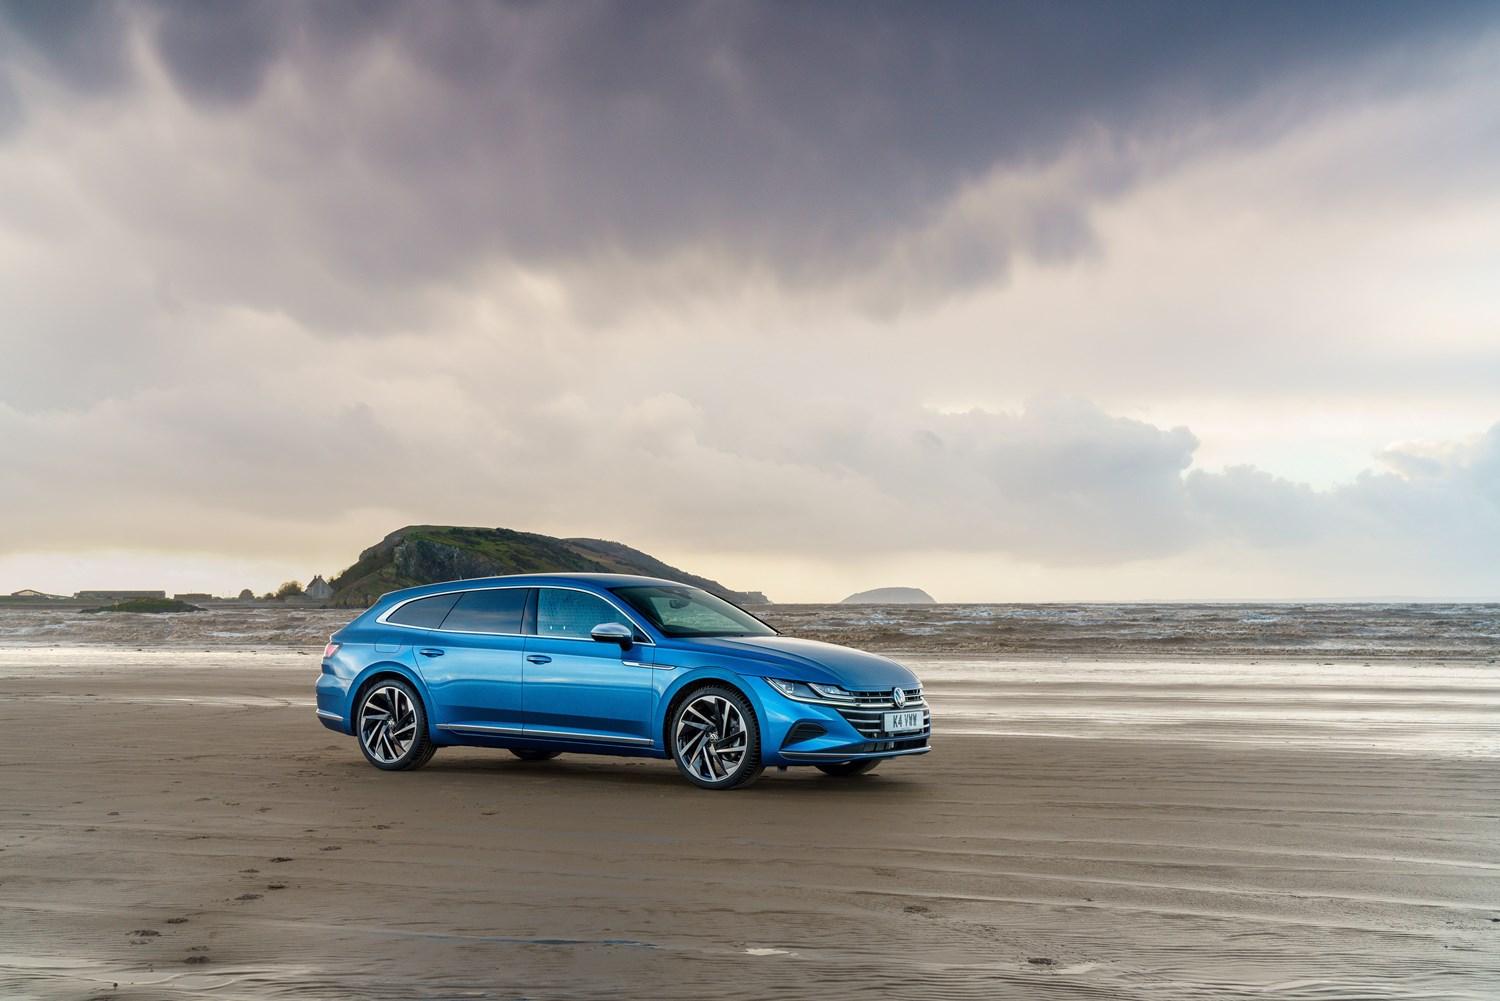 Side view of the new Volkswagen Arteon Shooting Brake in blue, parked on beach with sea behind